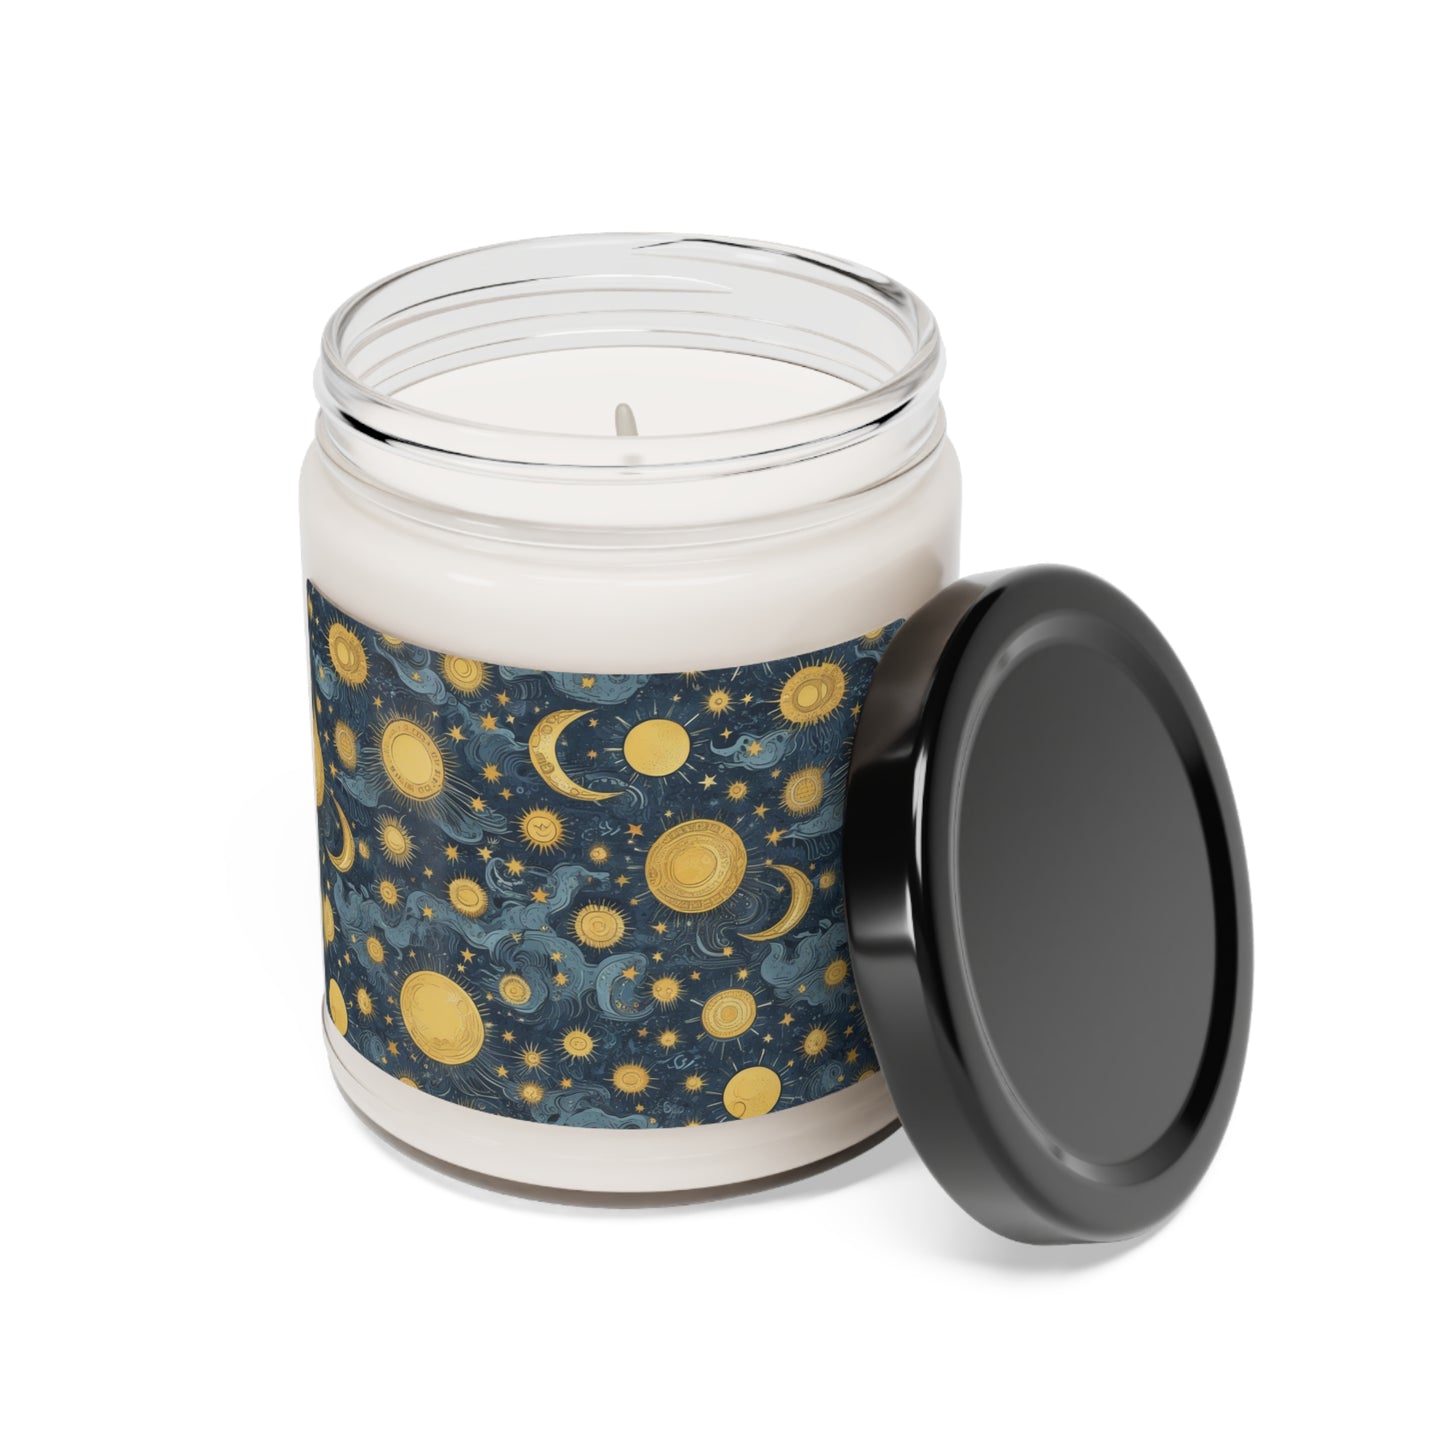 Celestial Print Scented Soy Candle, 9oz